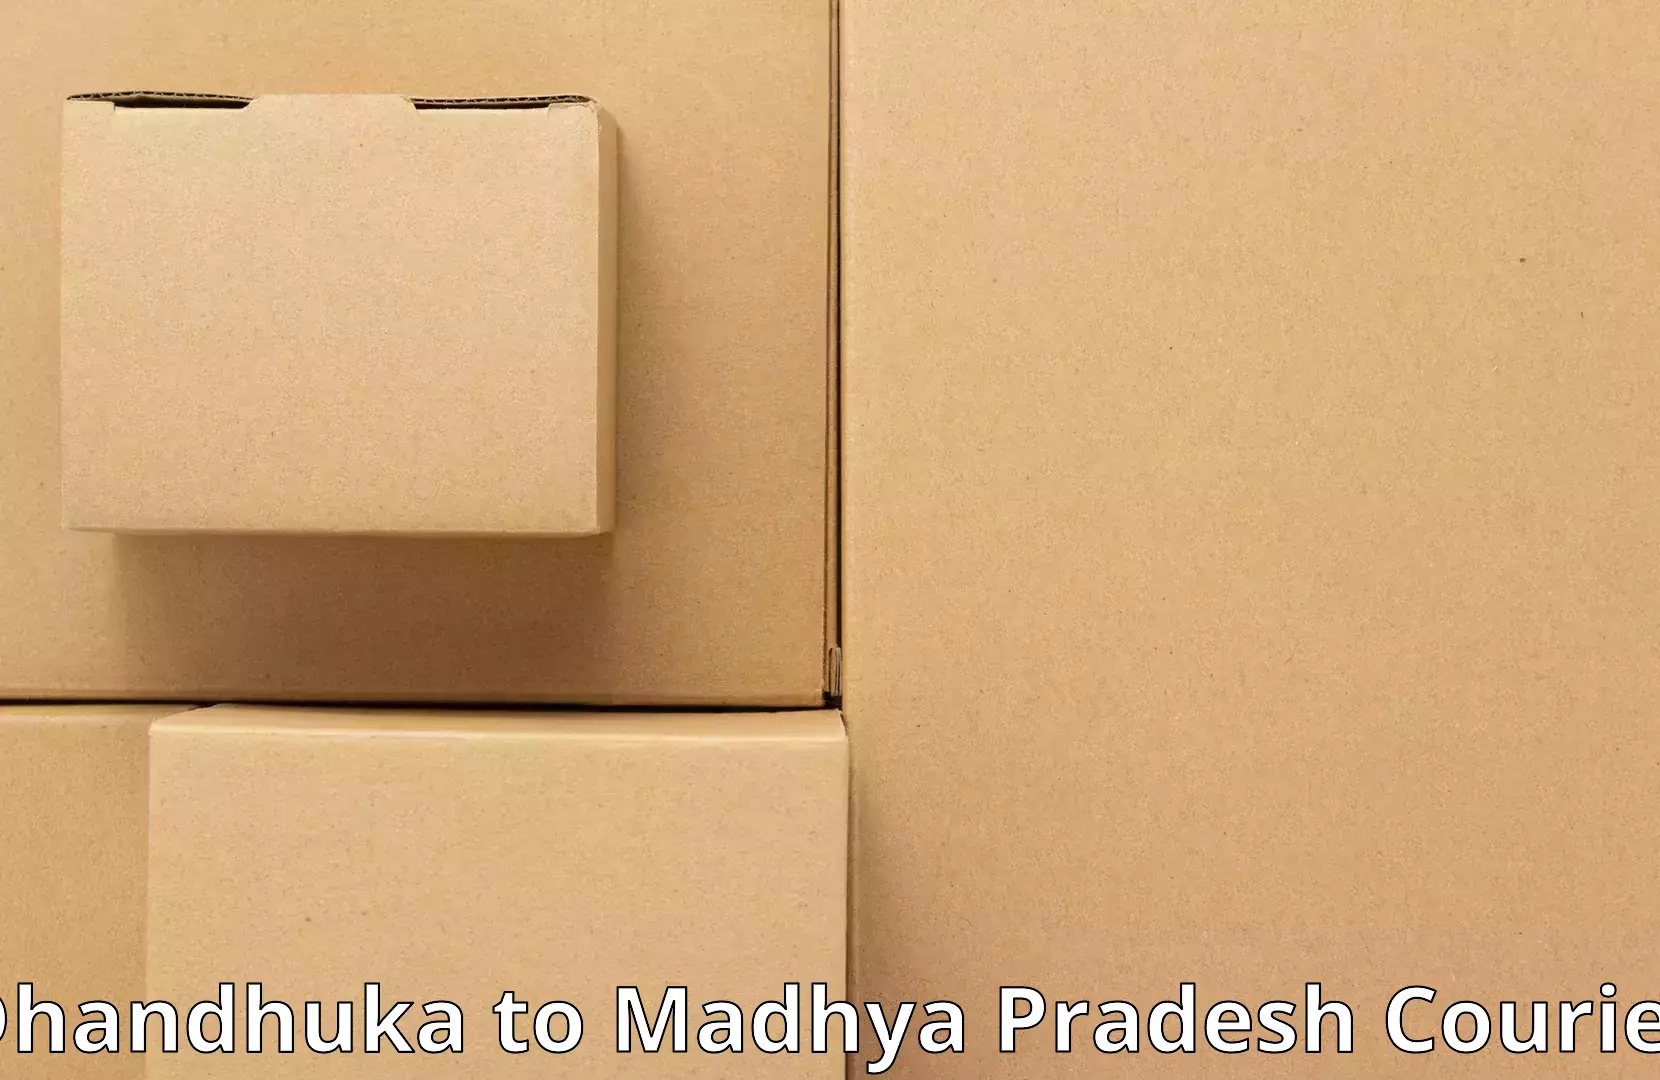 Furniture delivery service in Dhandhuka to Chhatarpur